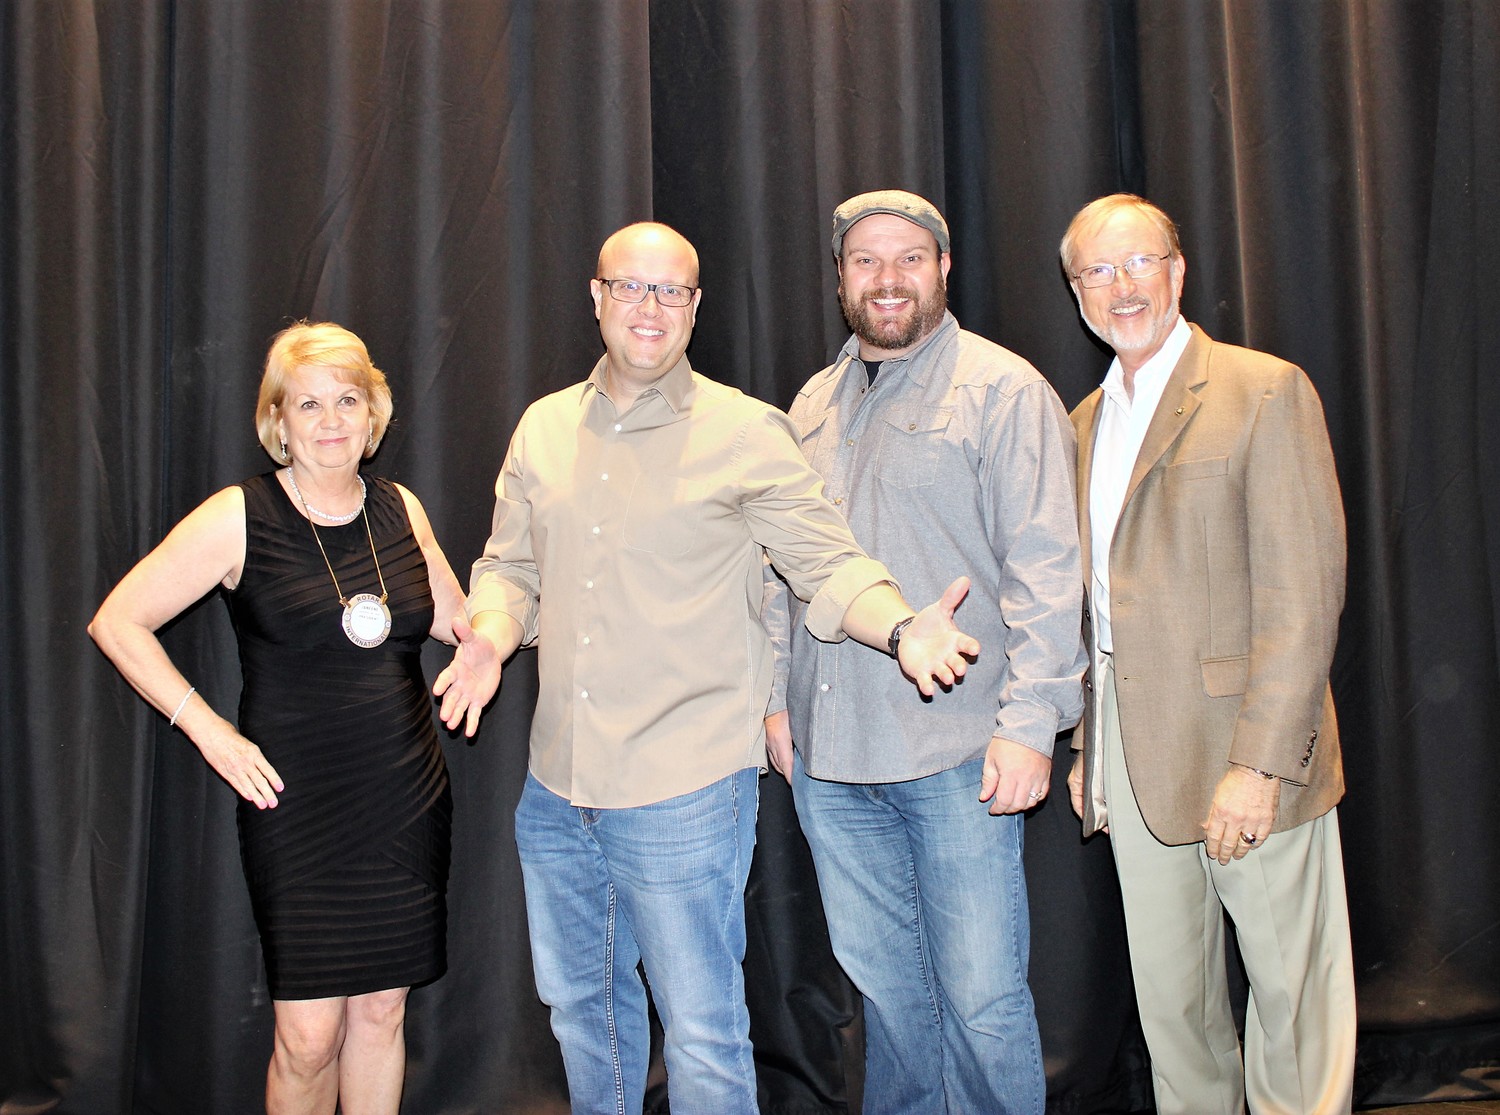 Janeene Hart, Danny Johnson, Paul Jensen and Waine Banyas gather at last year’s Comedy for a Cause fundraising event. This year’s event is taking place Saturday, April 21, at University of North Florida’s Robinson Theater.